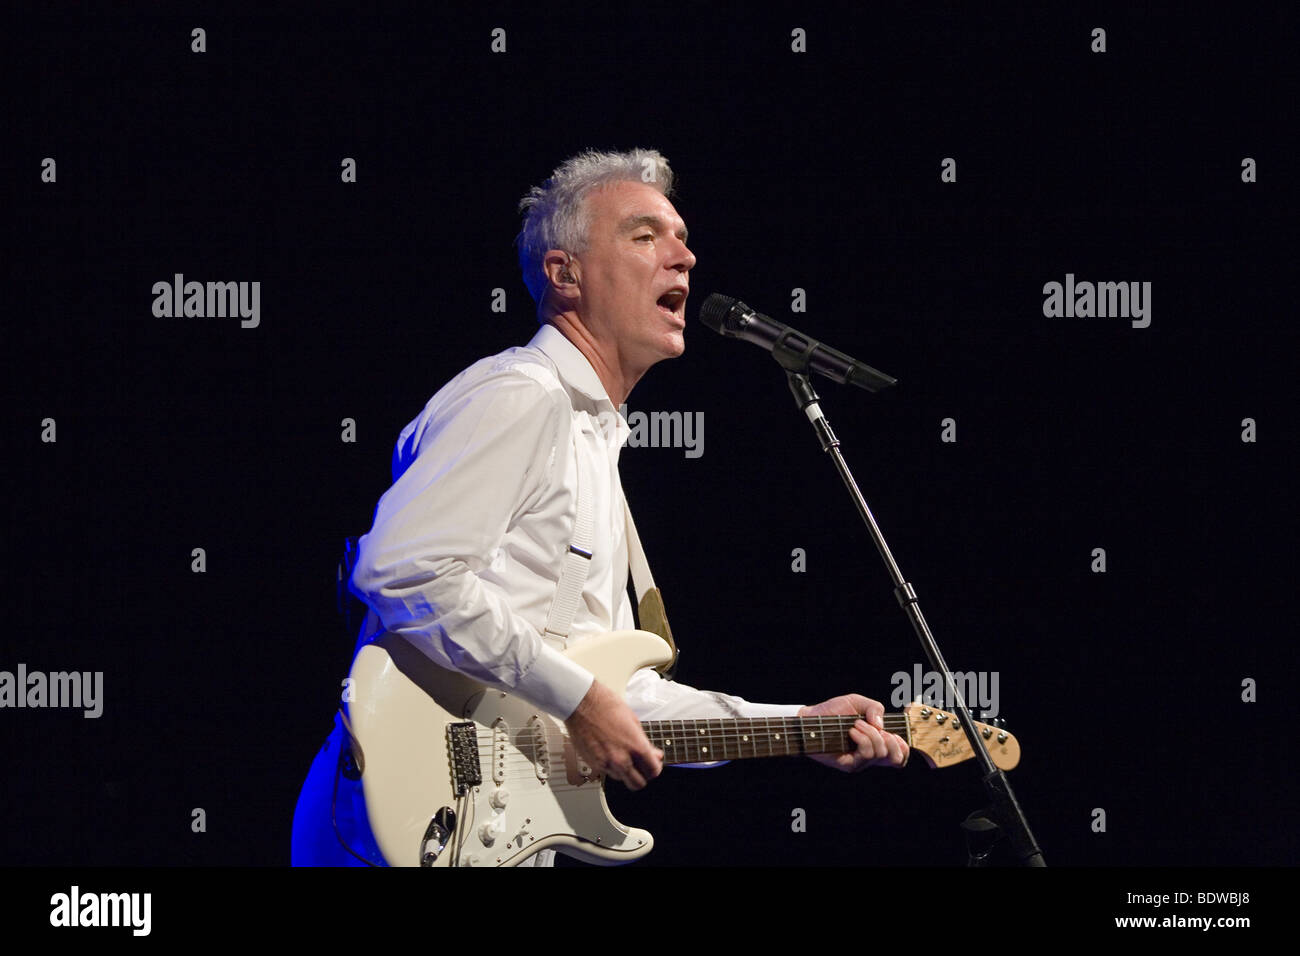 BUDAPEST-JULY 16: David Byrne perform on stage at Millenaris July 16, 2009 in Budapest, Hungary Stock Photo